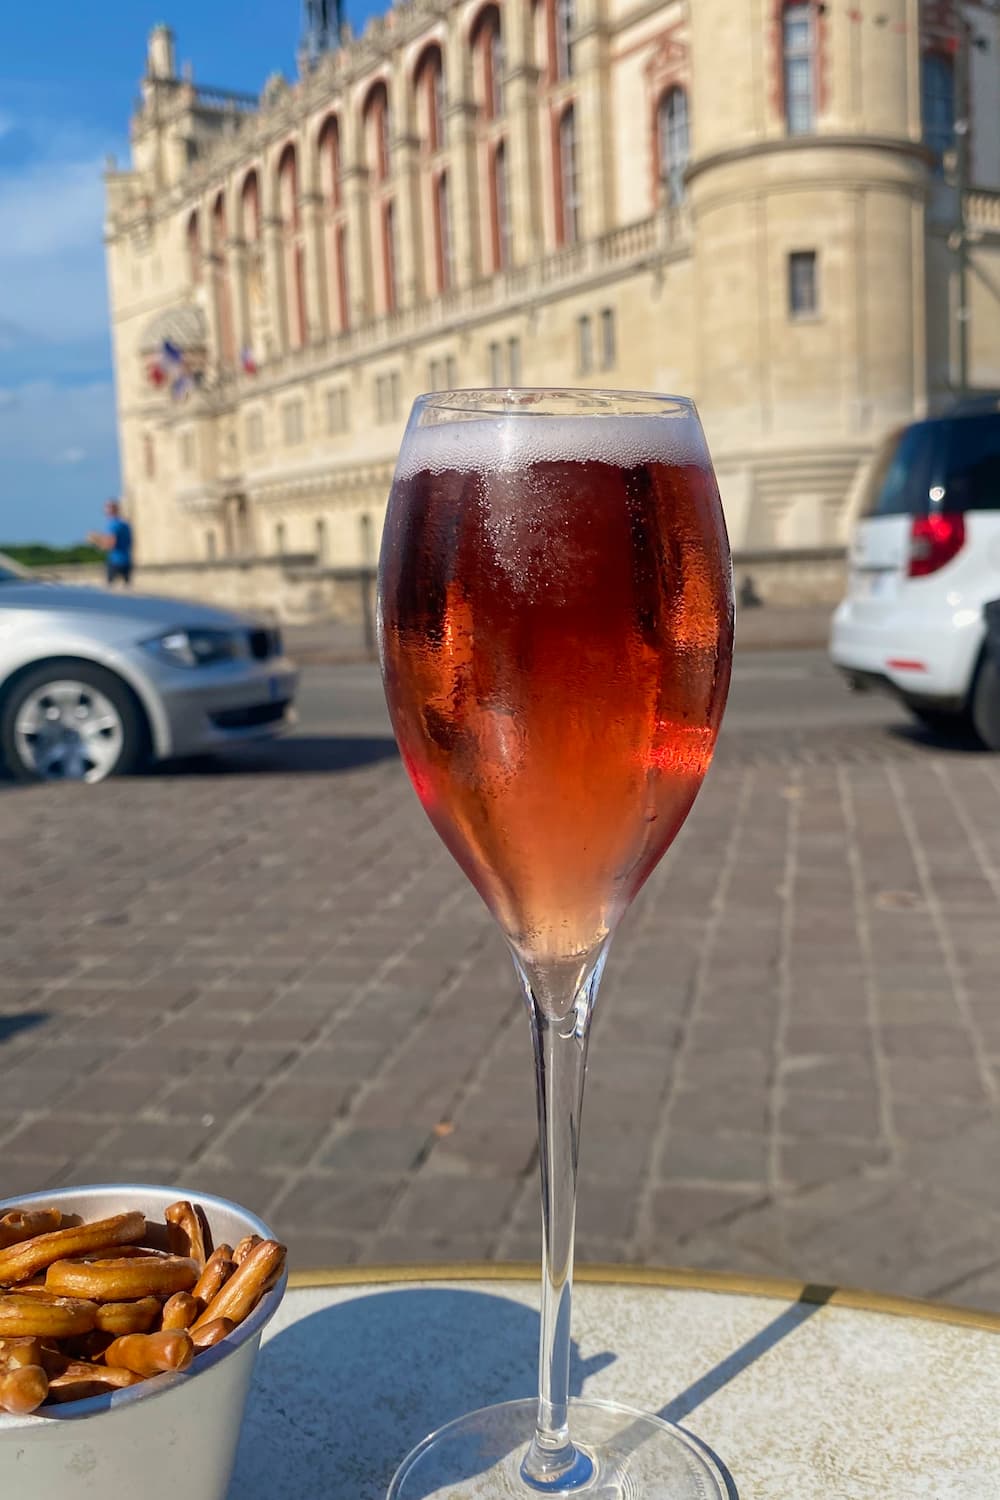 glass of Kir Royal drink in front of a chateau